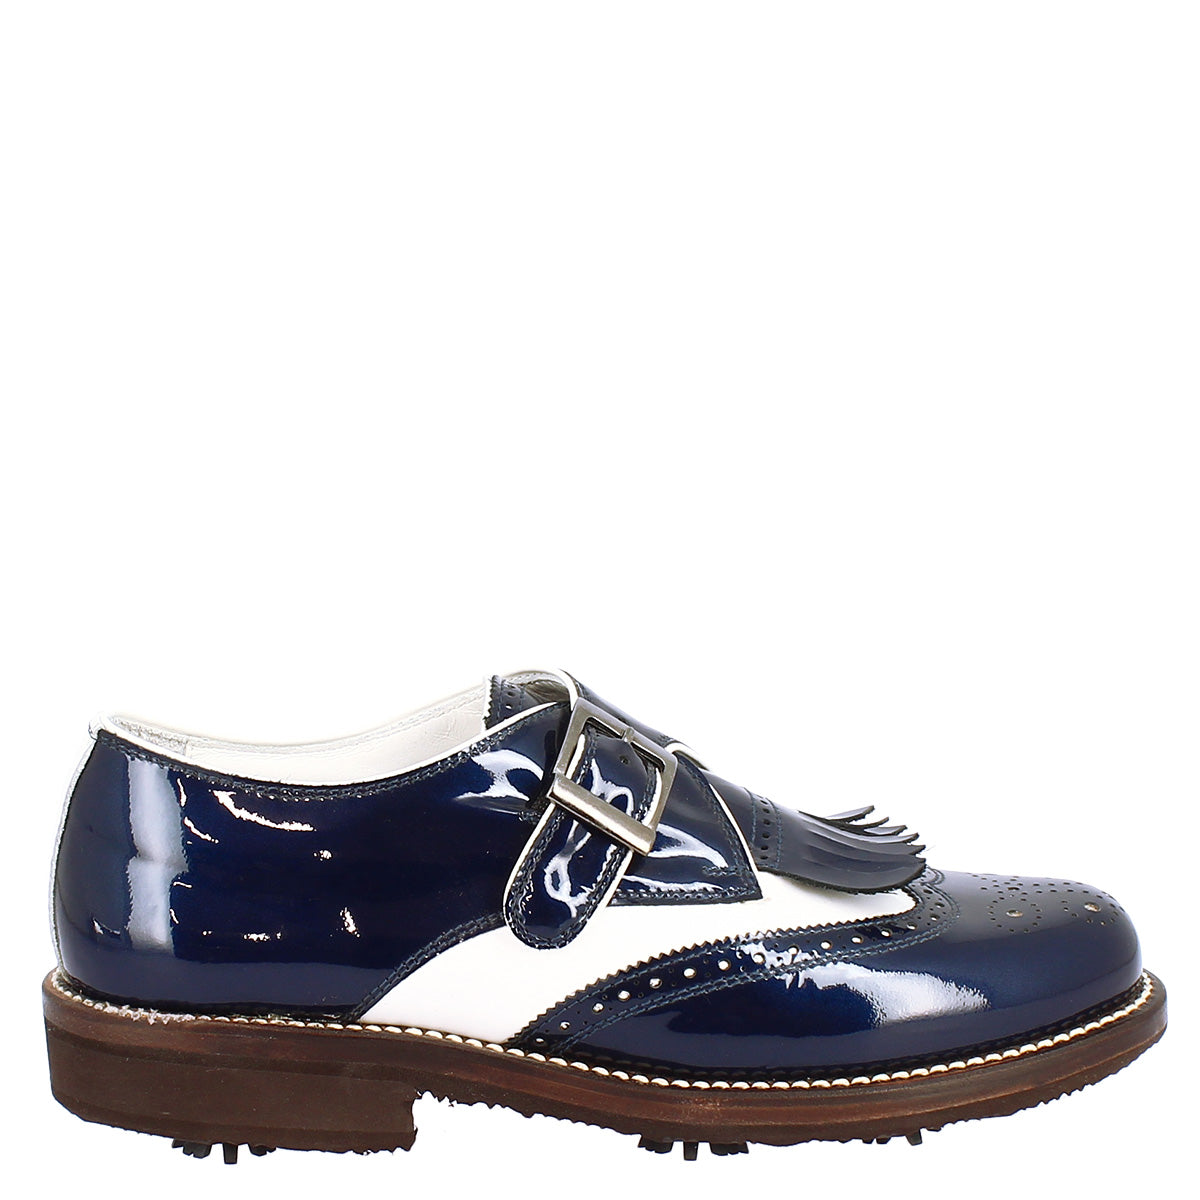 Ladies' golf buckle shoes in white leather and blue patent leather